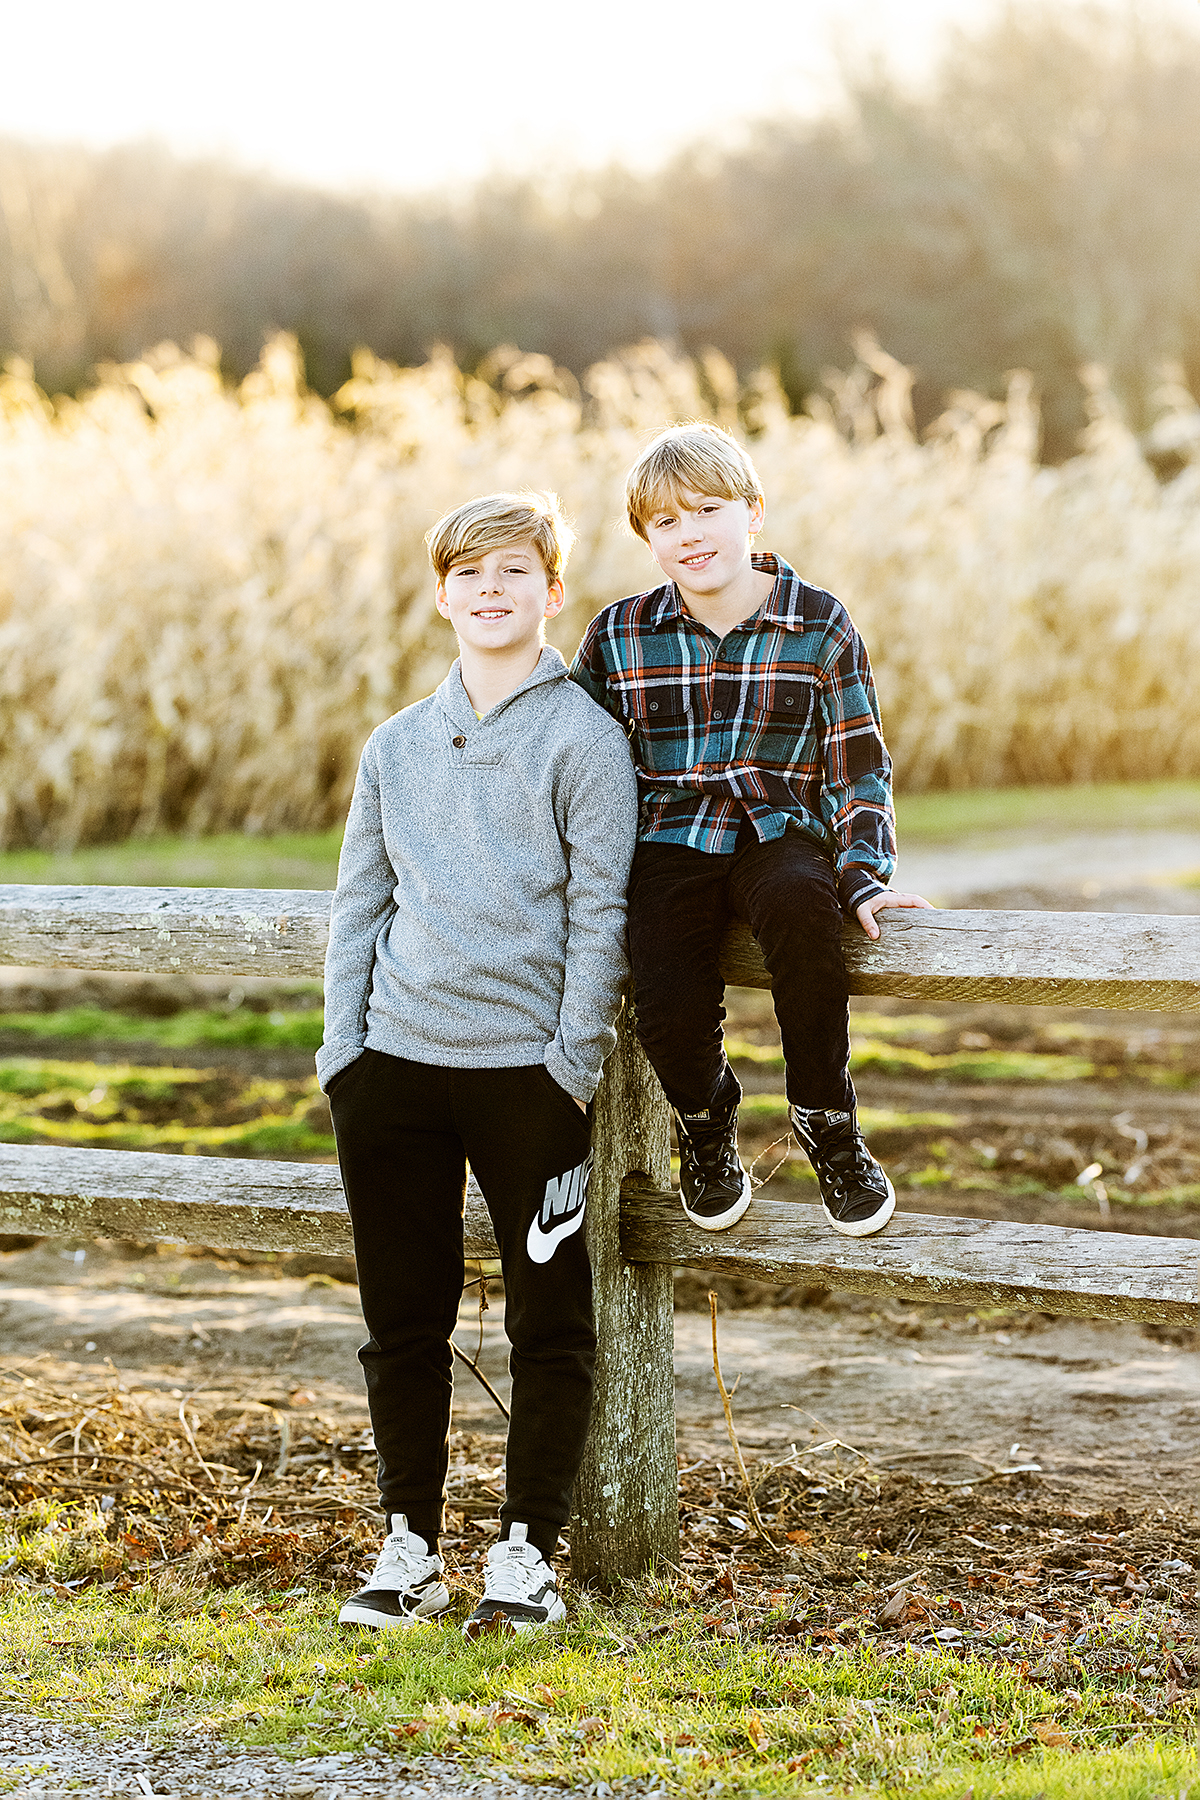 Fall Family mini Photo Session & Photography at "The Farmer's Daughter" in South Kingstown, RI - boys sitting on fence